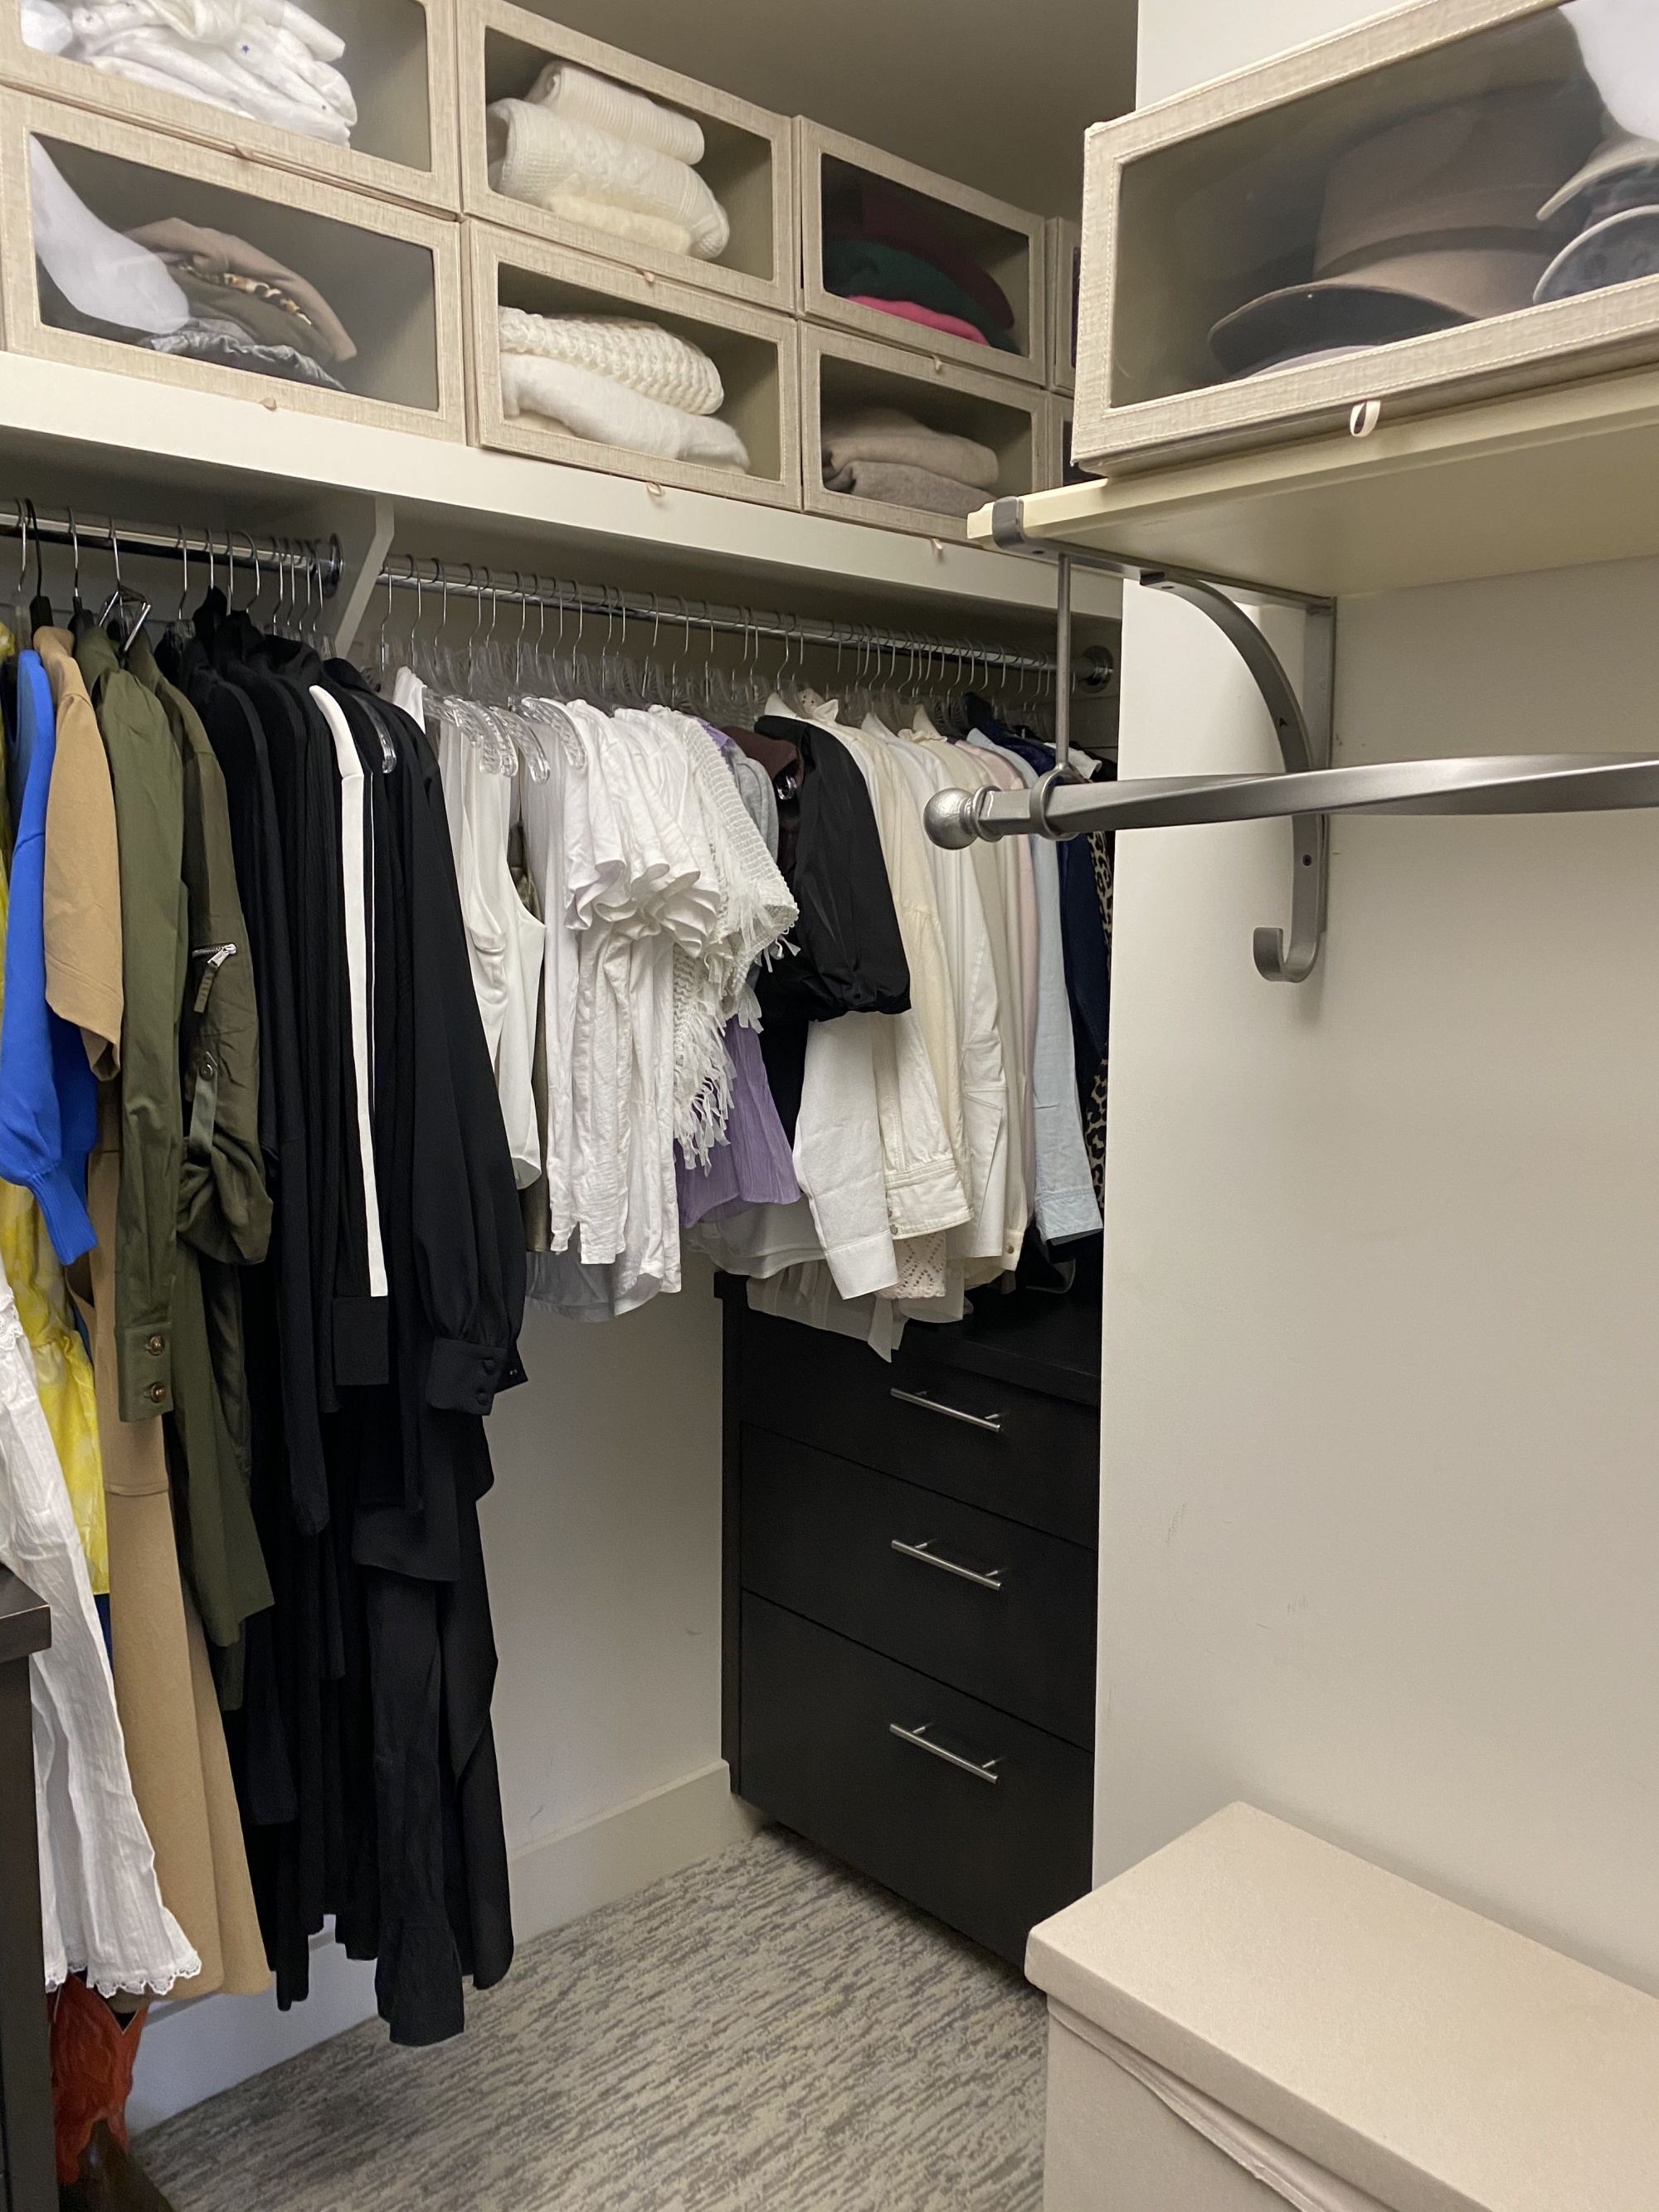 How To Edit Your Closet, Fashion blogger Erin Busbee of BusbeeStyle.com sharing her best tips for editing and purging your closet by showing some before and after photos of her organized closet in Telluride, Colorado